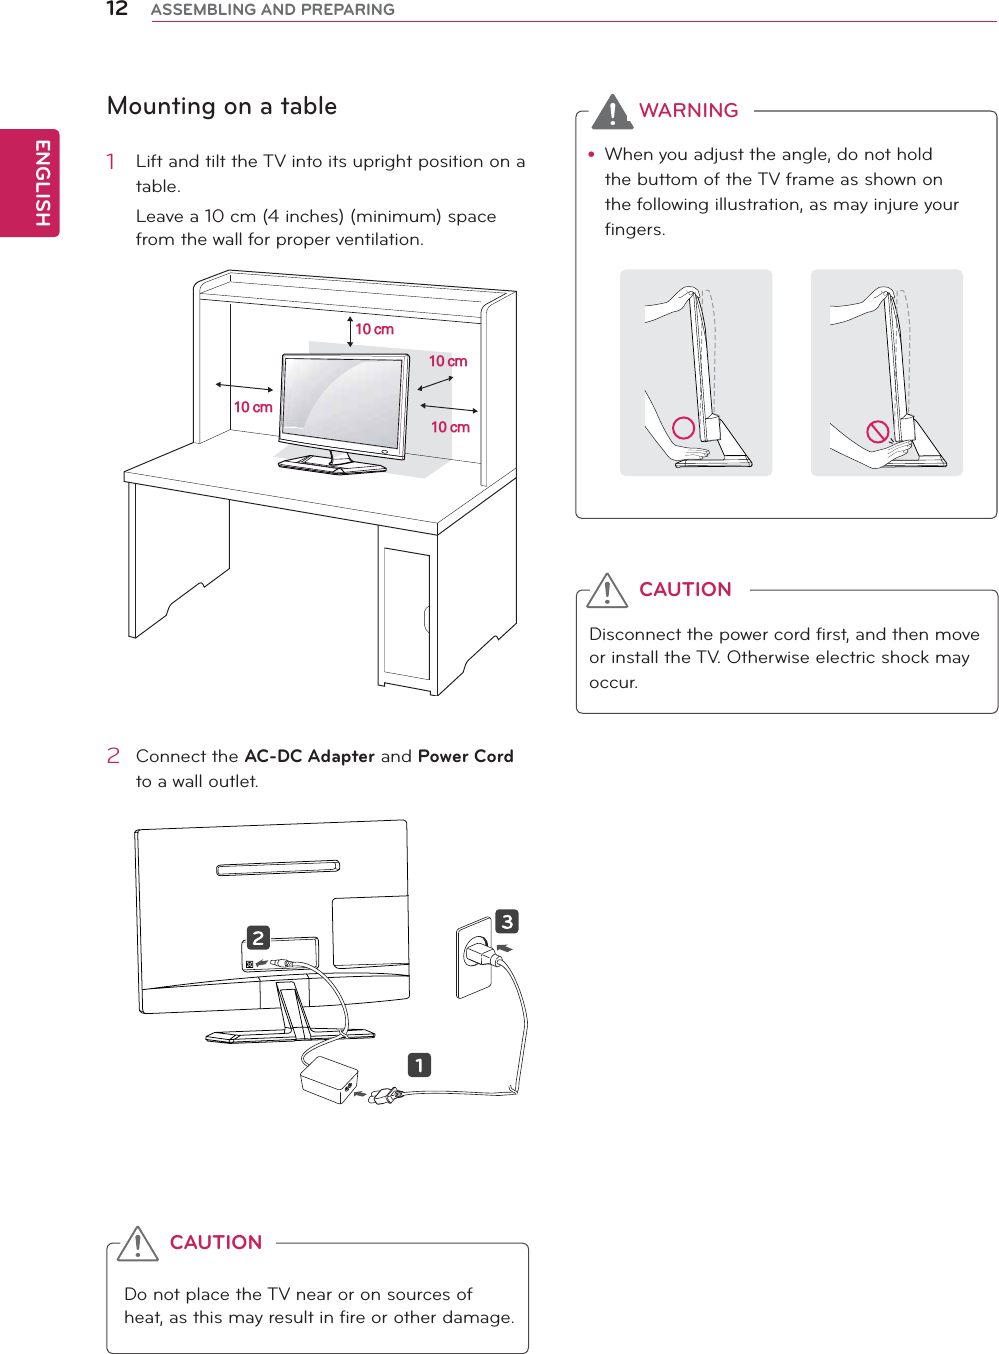 ENGLISH12 ASSEMBLING AND PREPARINGMounting on a table1  Lift and tilt the TV into its upright position on a table.Leave a 10 cm (4 inches) (minimum) space from the wall for proper ventilation.2 Connect the AC-DC Adapter and Power Cord to a wall outlet.Do not place the TV near or on sources of heat, as this may result in fire or other damage.CAUTIONy When you adjust the angle, do not hold the buttom of the TV frame as shown on the following illustration, as may injure your fingers.Disconnect the power cord first, and then move or install the TV. Otherwise electric shock may occur.WARNINGCAUTION10 cm10 cm10 cm10 cm